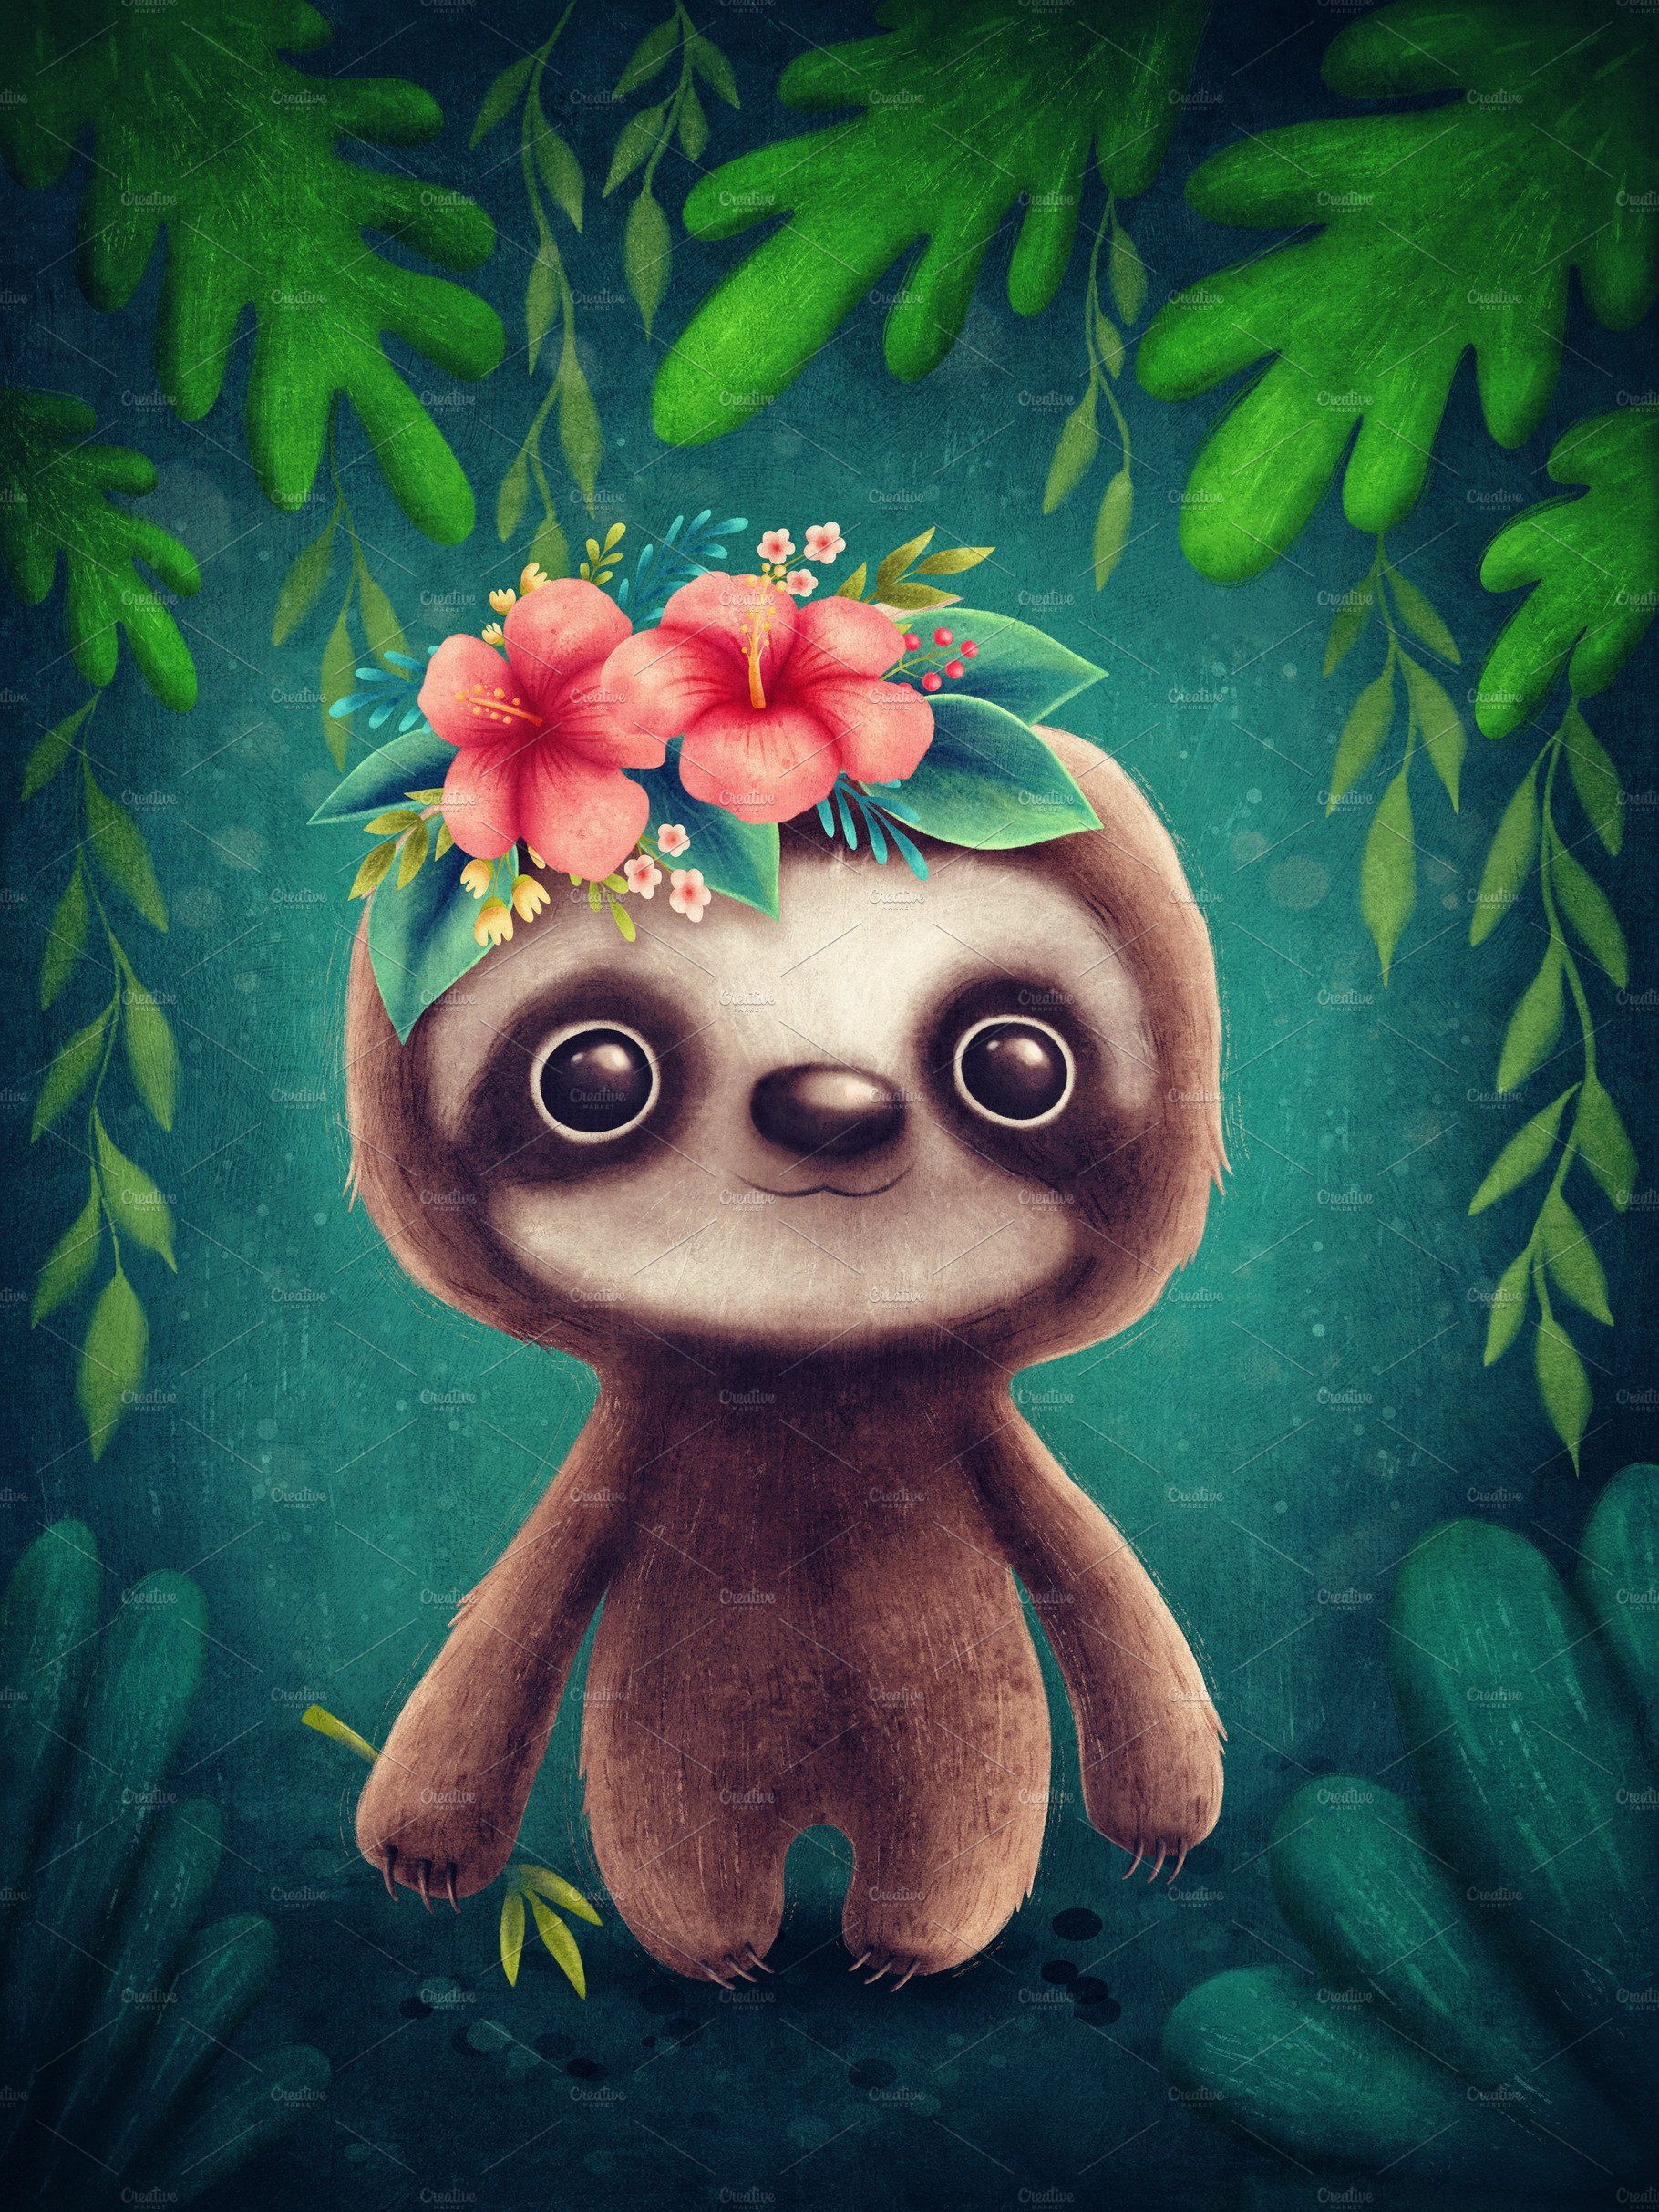 sloth wallpaper to fit my computer